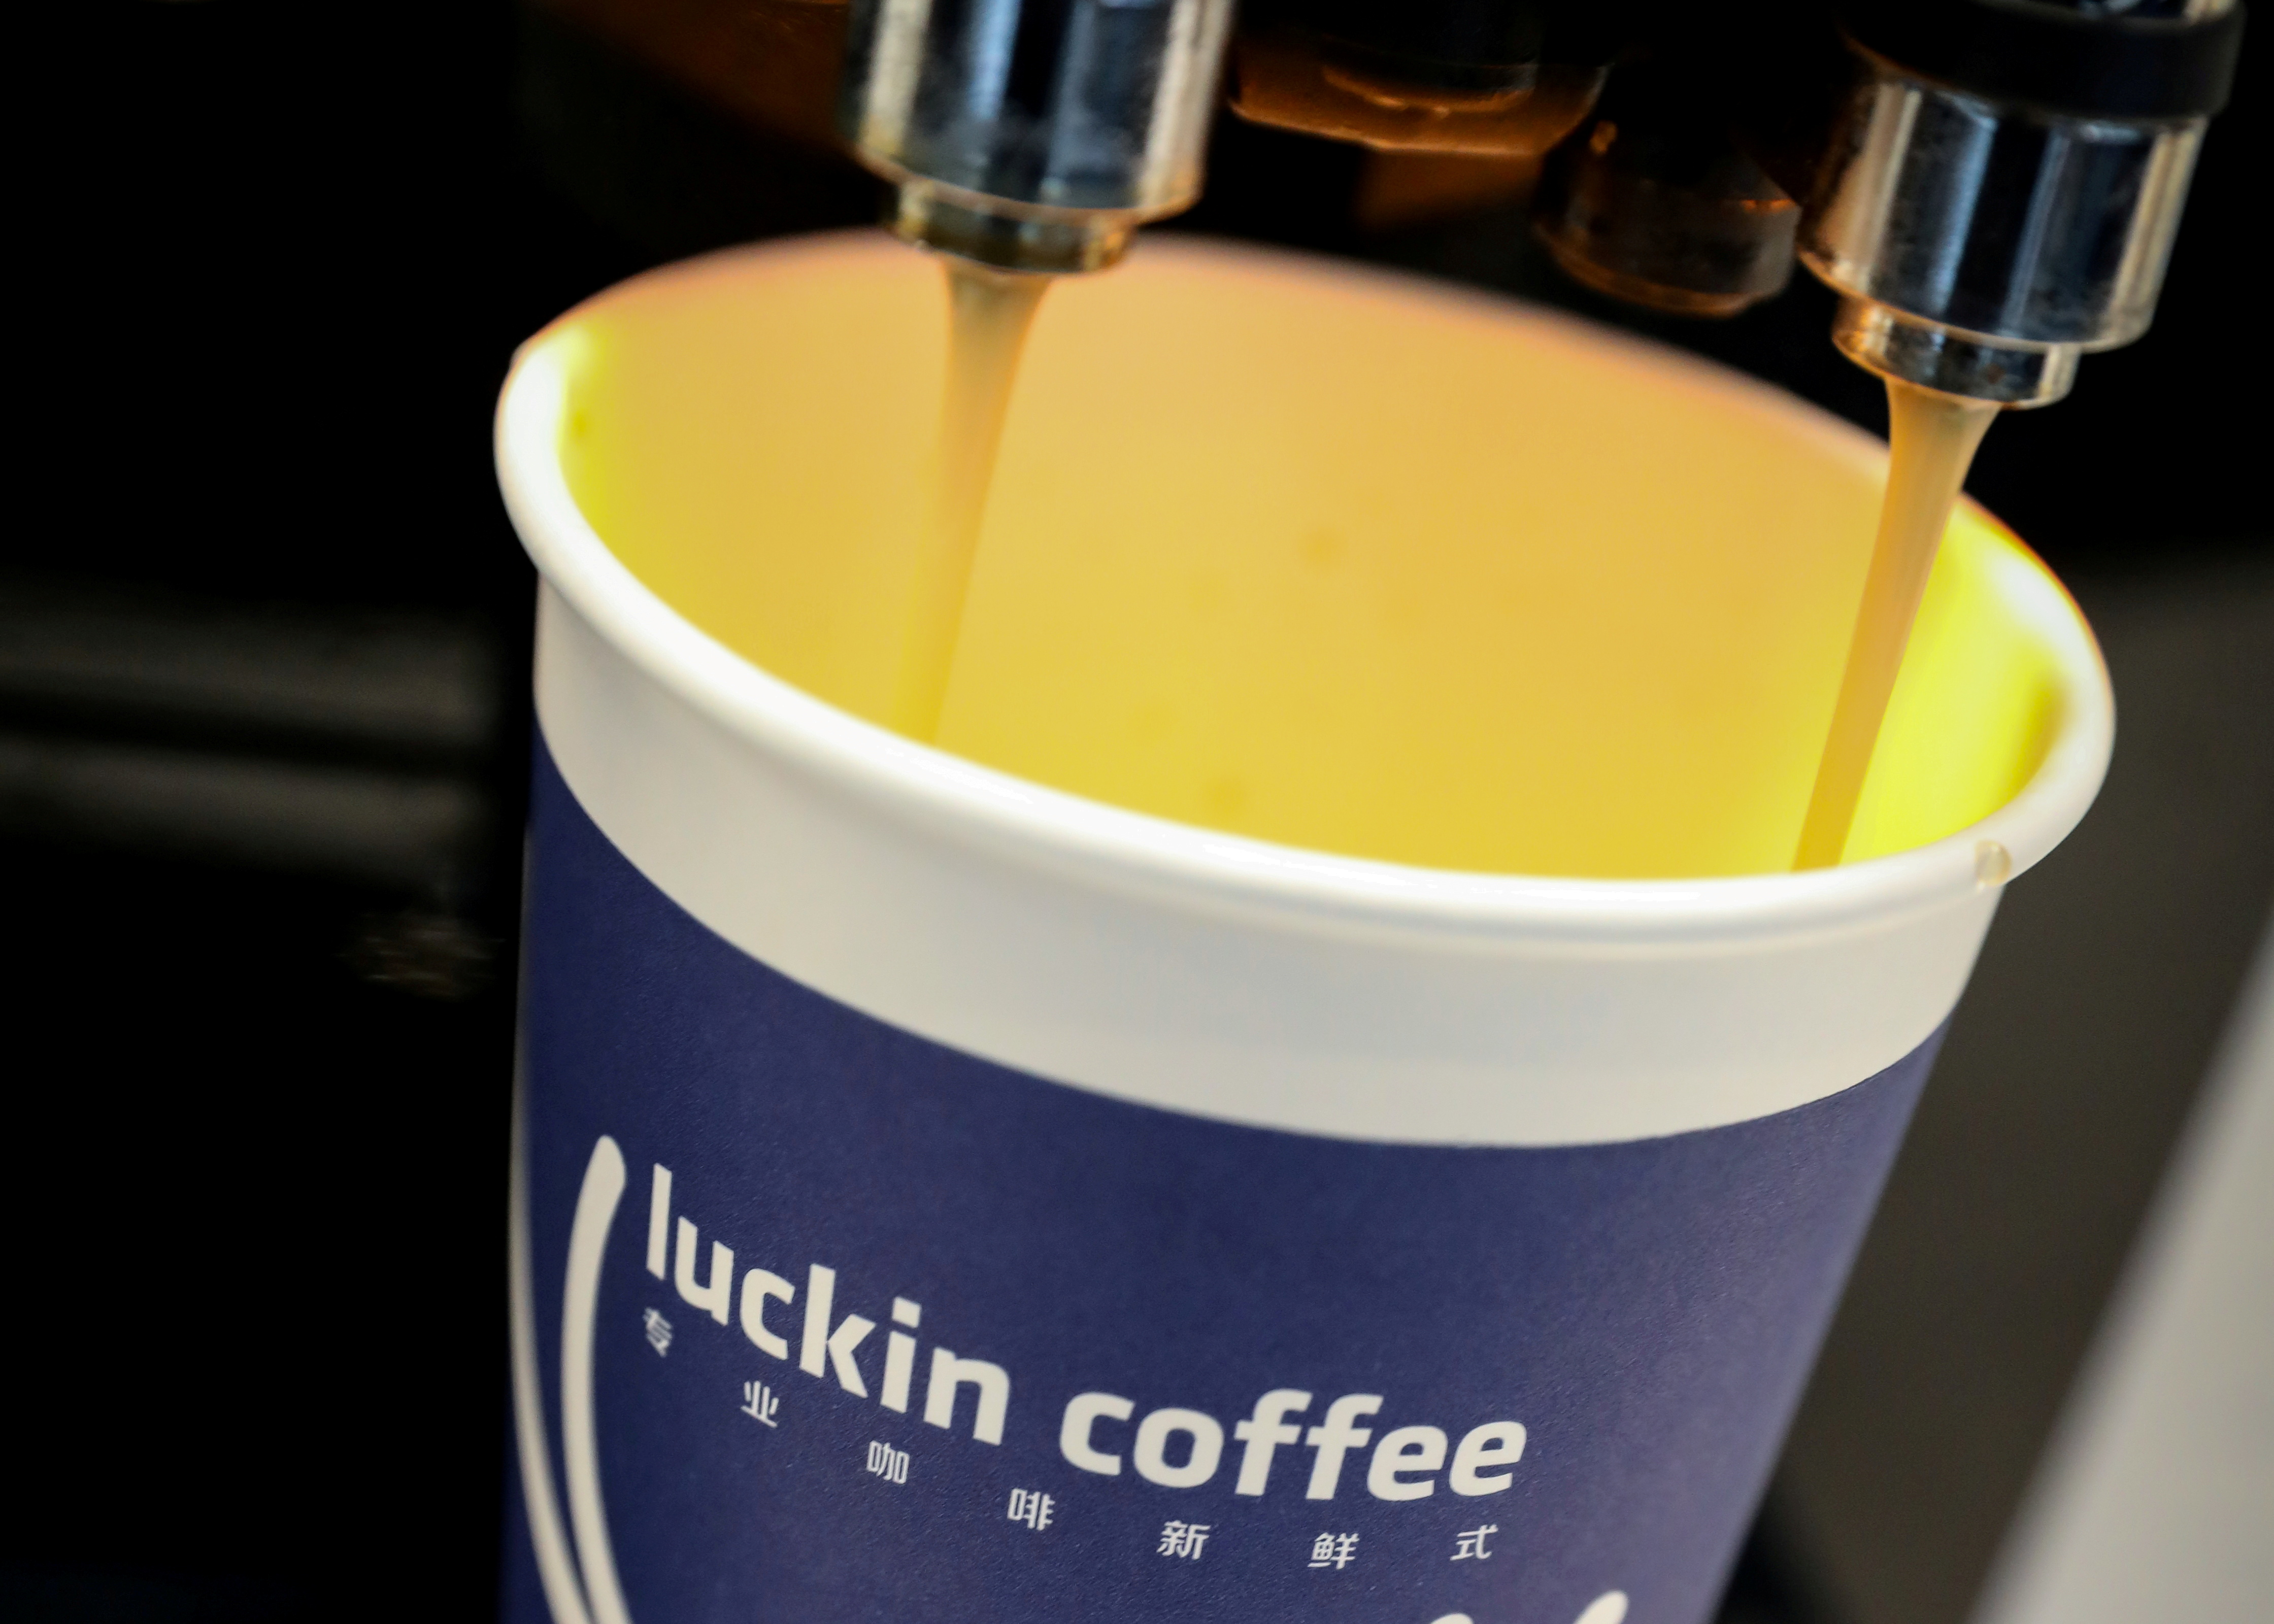 A cup of 'Luckin Coffee' coffee is poured during the company's IPO at the Nasdaq Market site in New York